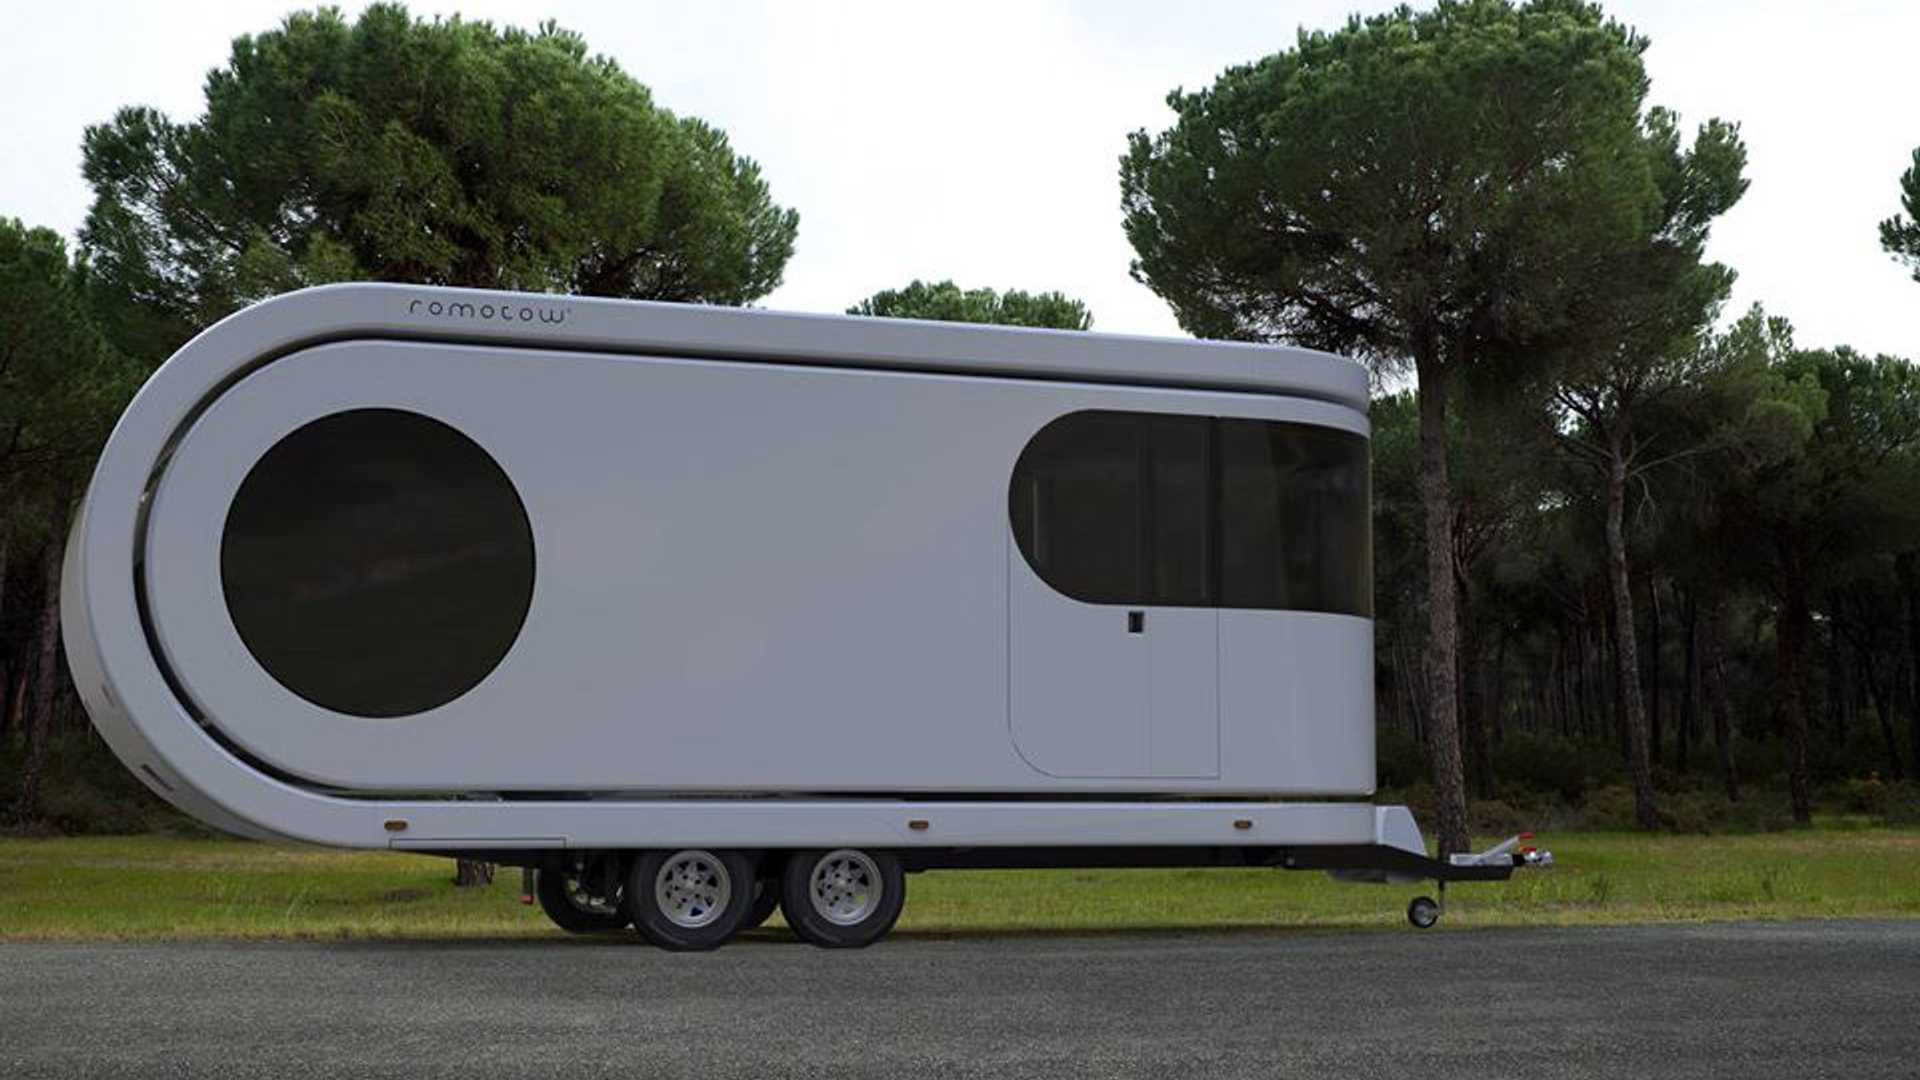 https://s1.cdn.autoevolution.com/images/news/gallery/romotow-trailer-camper-has-in-built-patio-for-the-ultimate-chill-experience_4.jpg